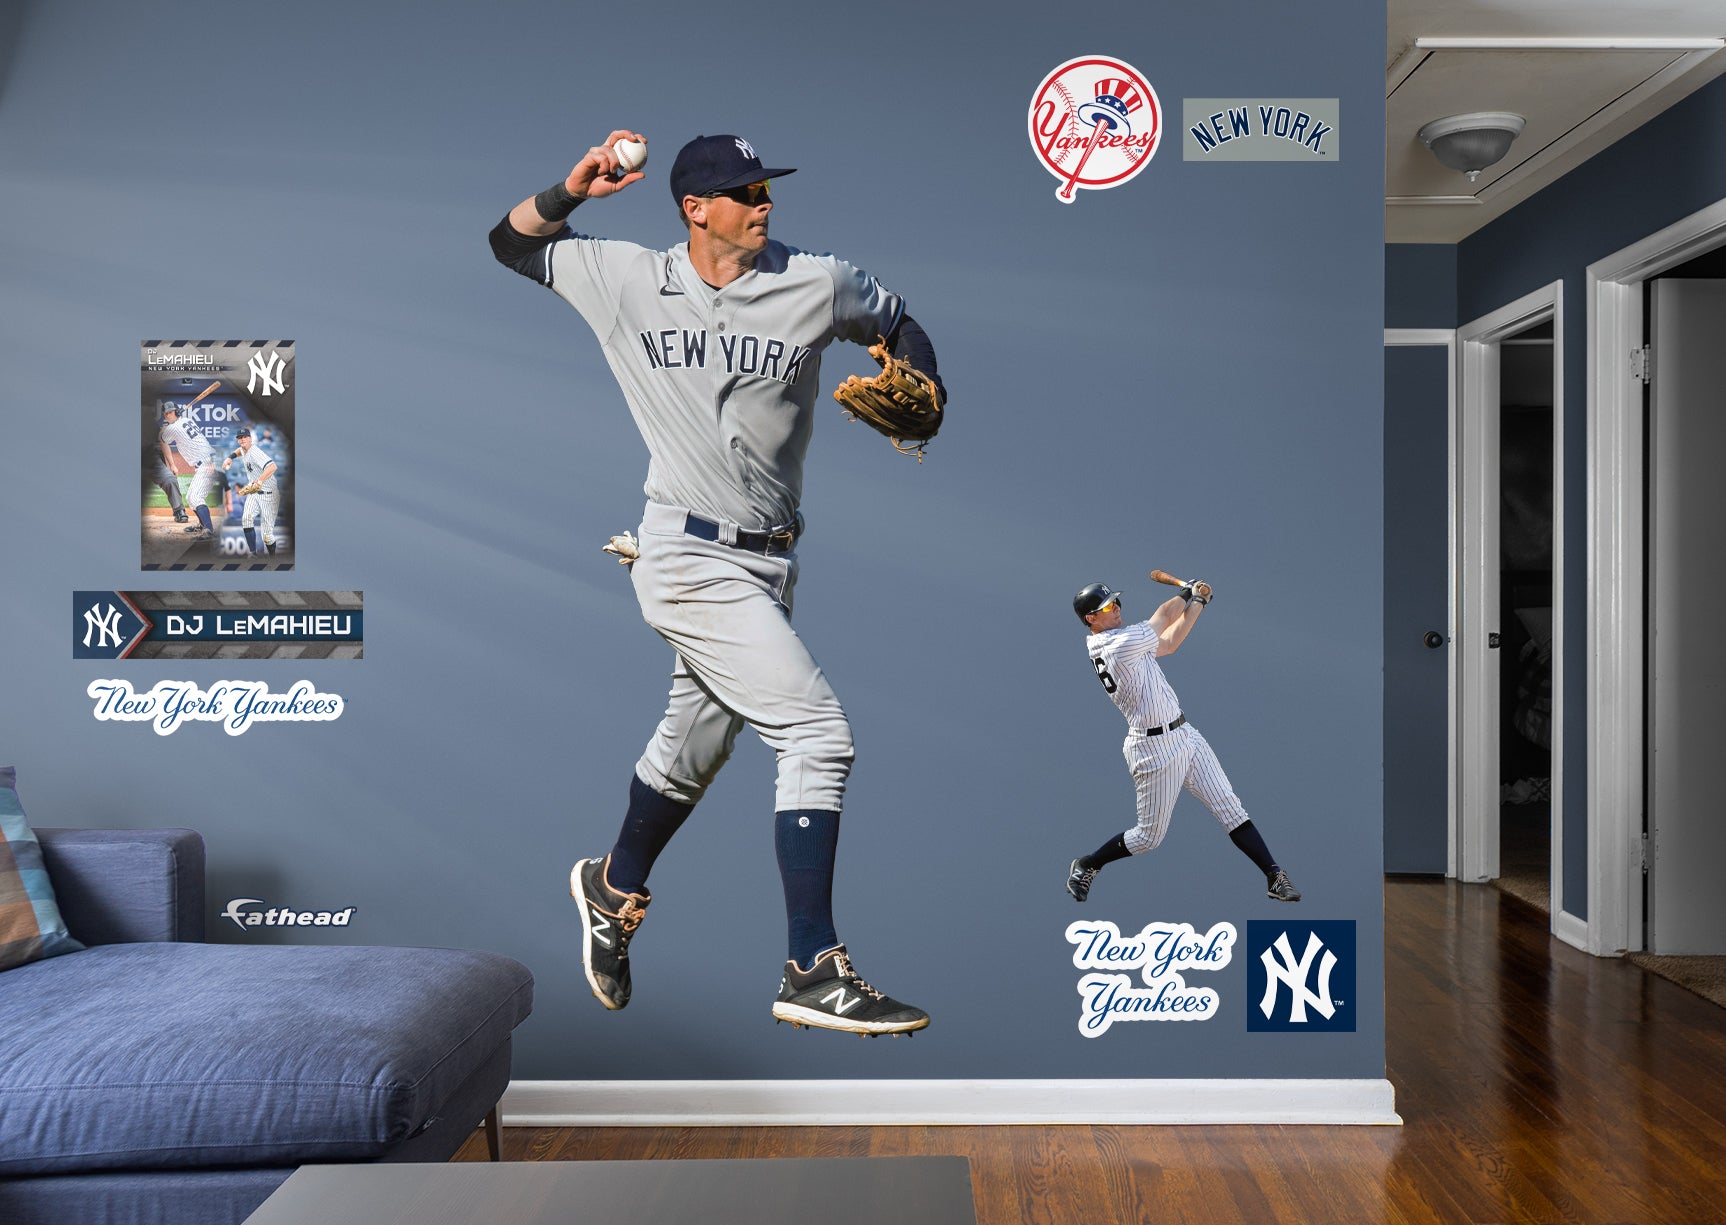 New York Yankees: DJ LeMahieu 2021 - MLB Removable Wall Adhesive Wall Decal Life-Size Athlete +9 Wall Decals 39W x 78H